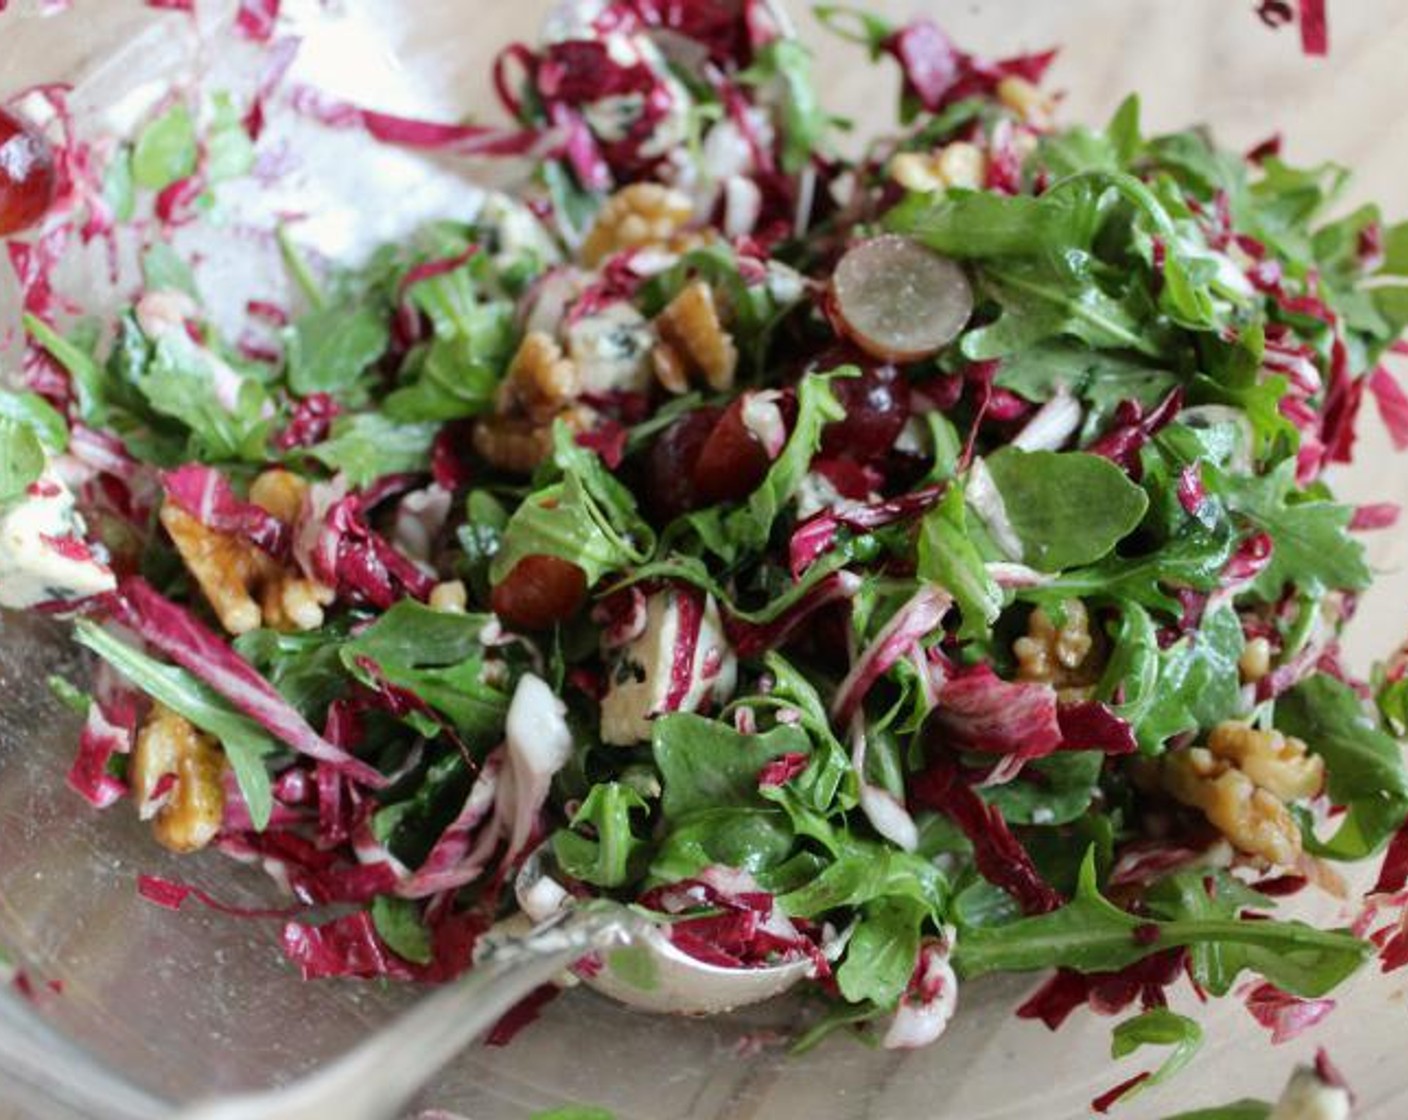 step 3 Meanwhile, in a large bowl, combine the Baby Arugula (2 1/2 cups), Radicchio (1/2), Walnut (1/2), and Red Seedless Grapes (2/3 cup).